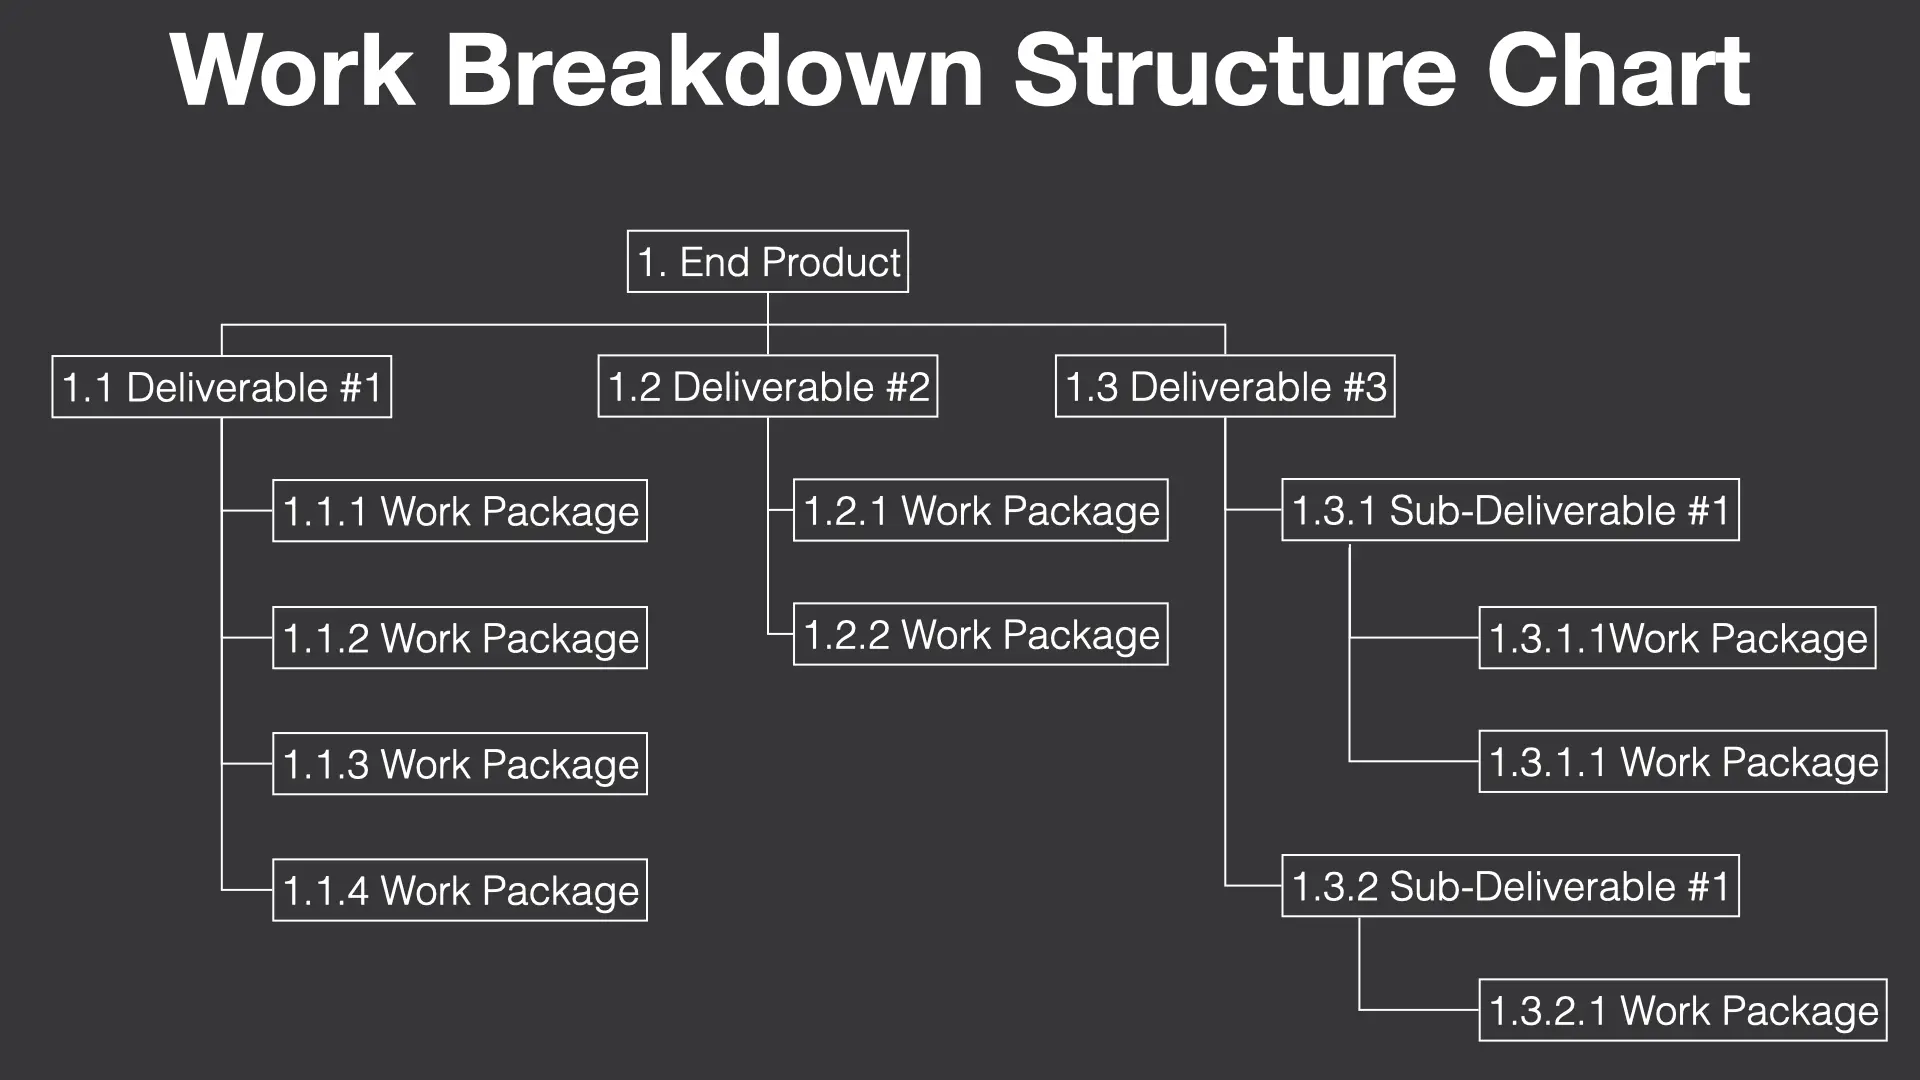 Work breakdown structure in hierarchical chart representation